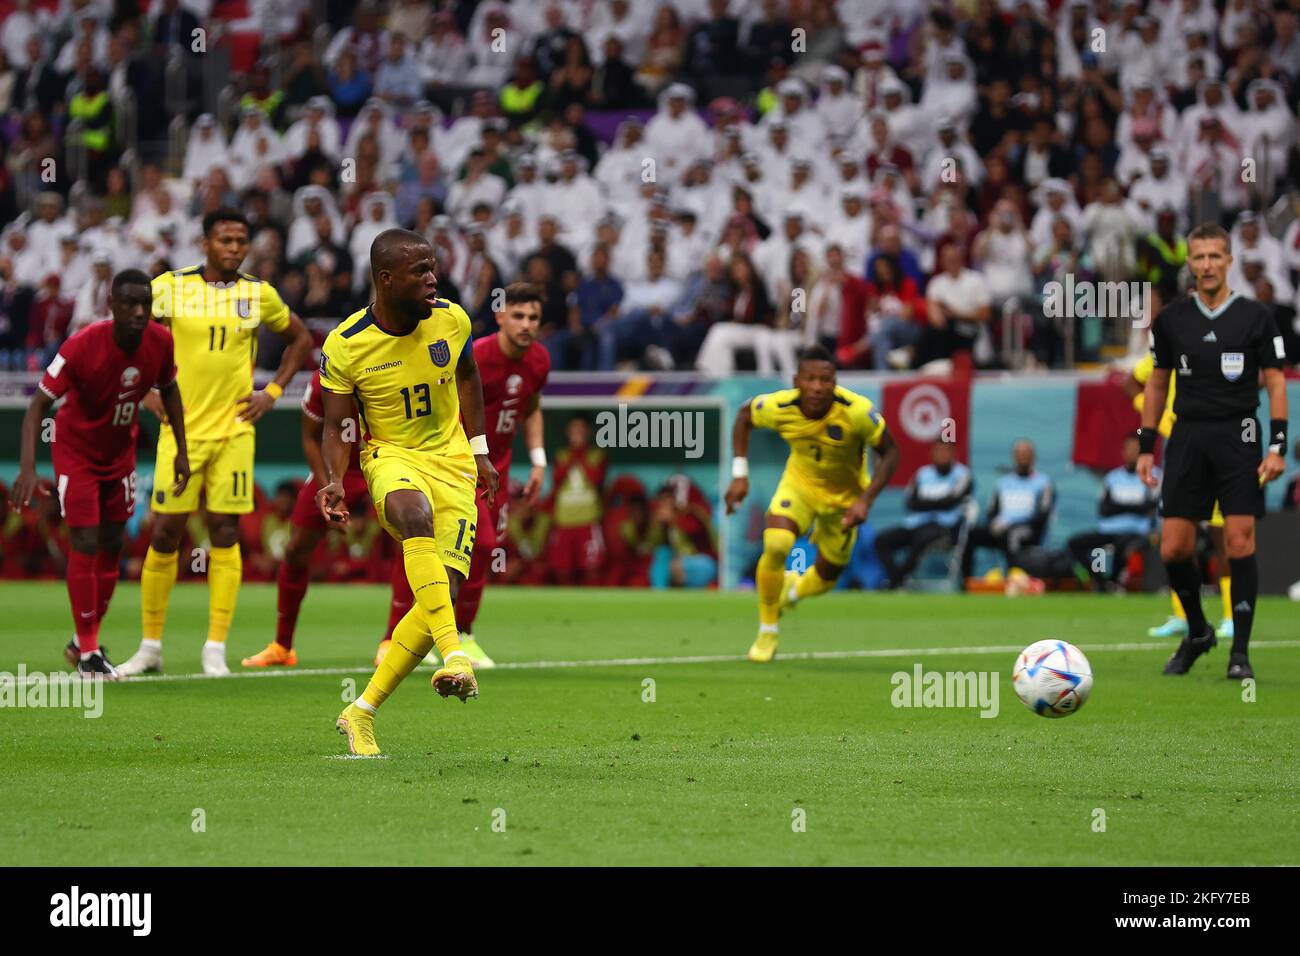 Doha, Qatar. 20th Nov, 2022. Enner Valencia of Ecuador scores the opening goal from the penalty spot during the 2022 FIFA World Cup Group A match at the Al Bayt Stadium in Doha, Qatar on November 20, 2022. Photo by Chris Brunskill/UPI Credit: UPI/Alamy Live News Stock Photo